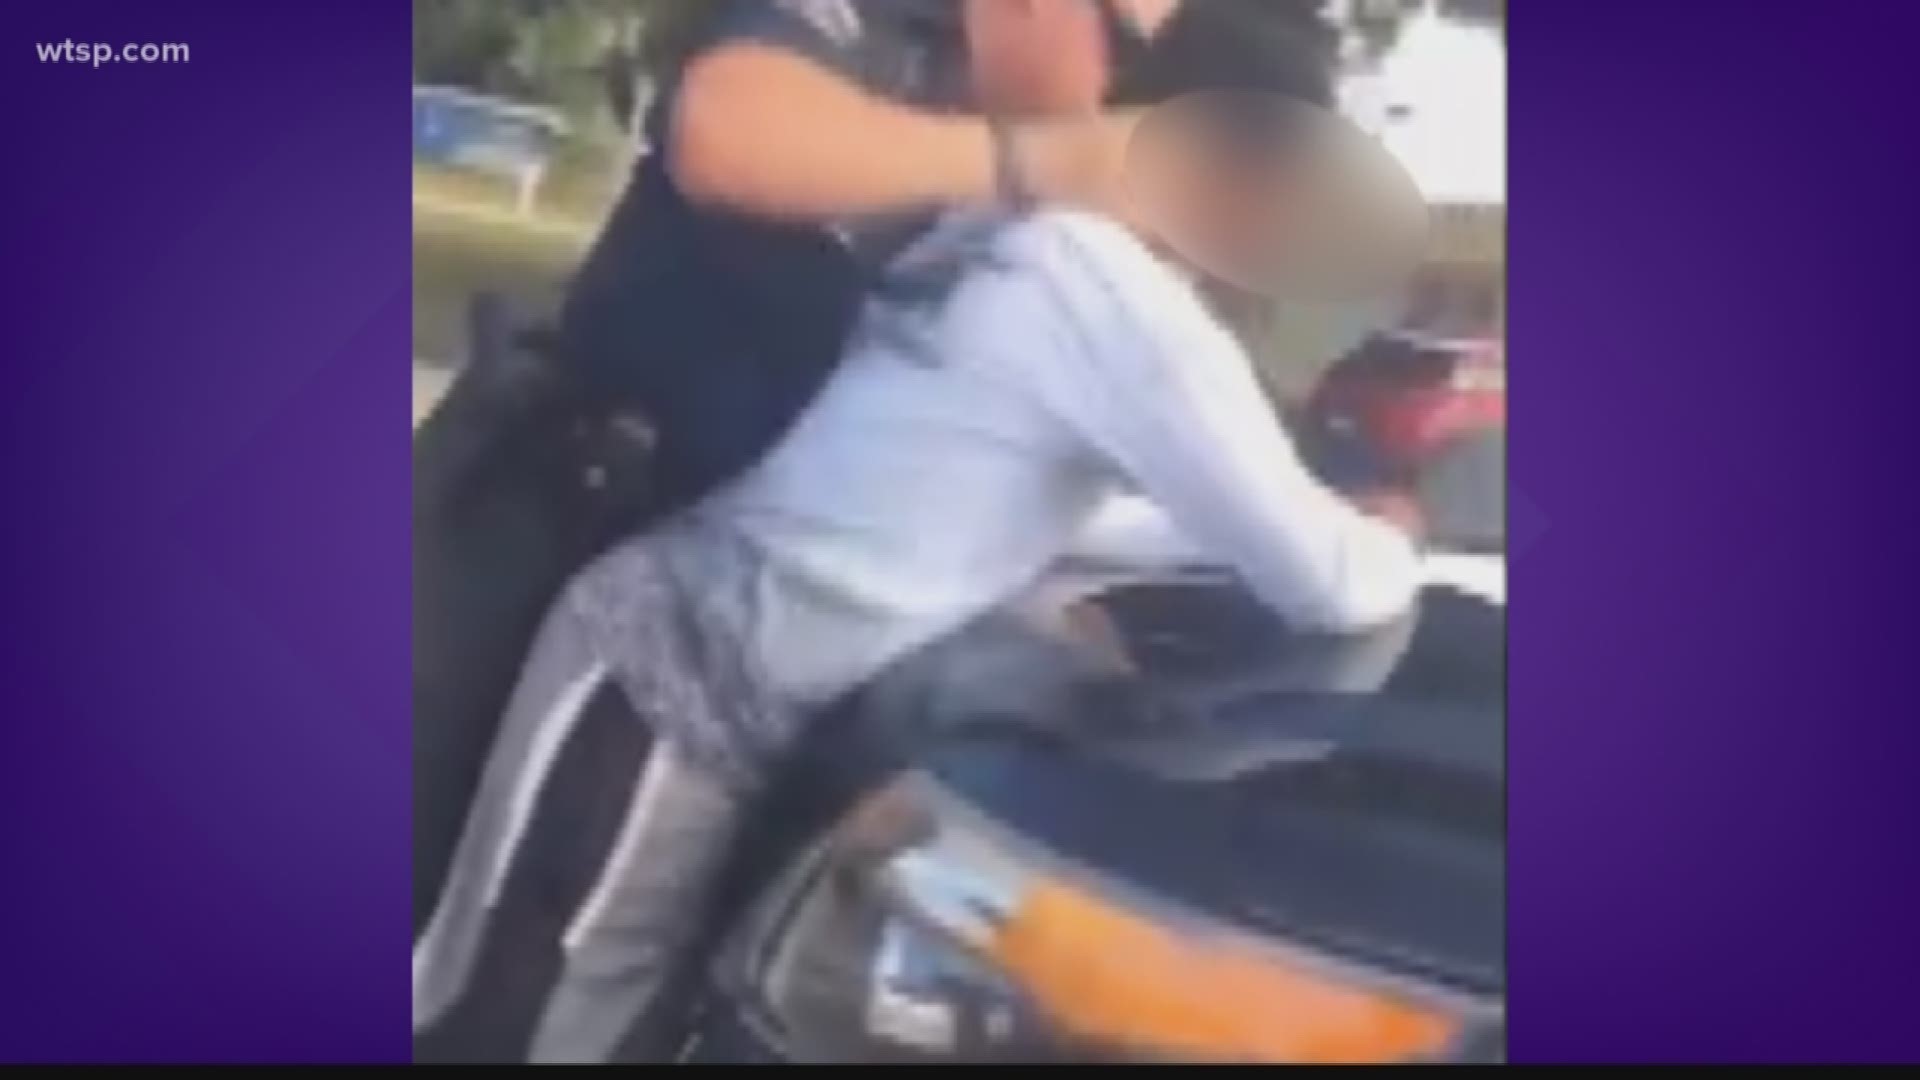 A Largo police officer was fired Tuesday after an internal affairs investigation of video that showed him grabbing a 17-year-old boy by the neck.

According to a case report obtained by 10News, Brian Livernois, 43, was accused of using inappropriate force and violating a policy regarding rude behavior or profane language. Largo Police Chief Jeffrey Undestad said the situation warranted the officer's termination.